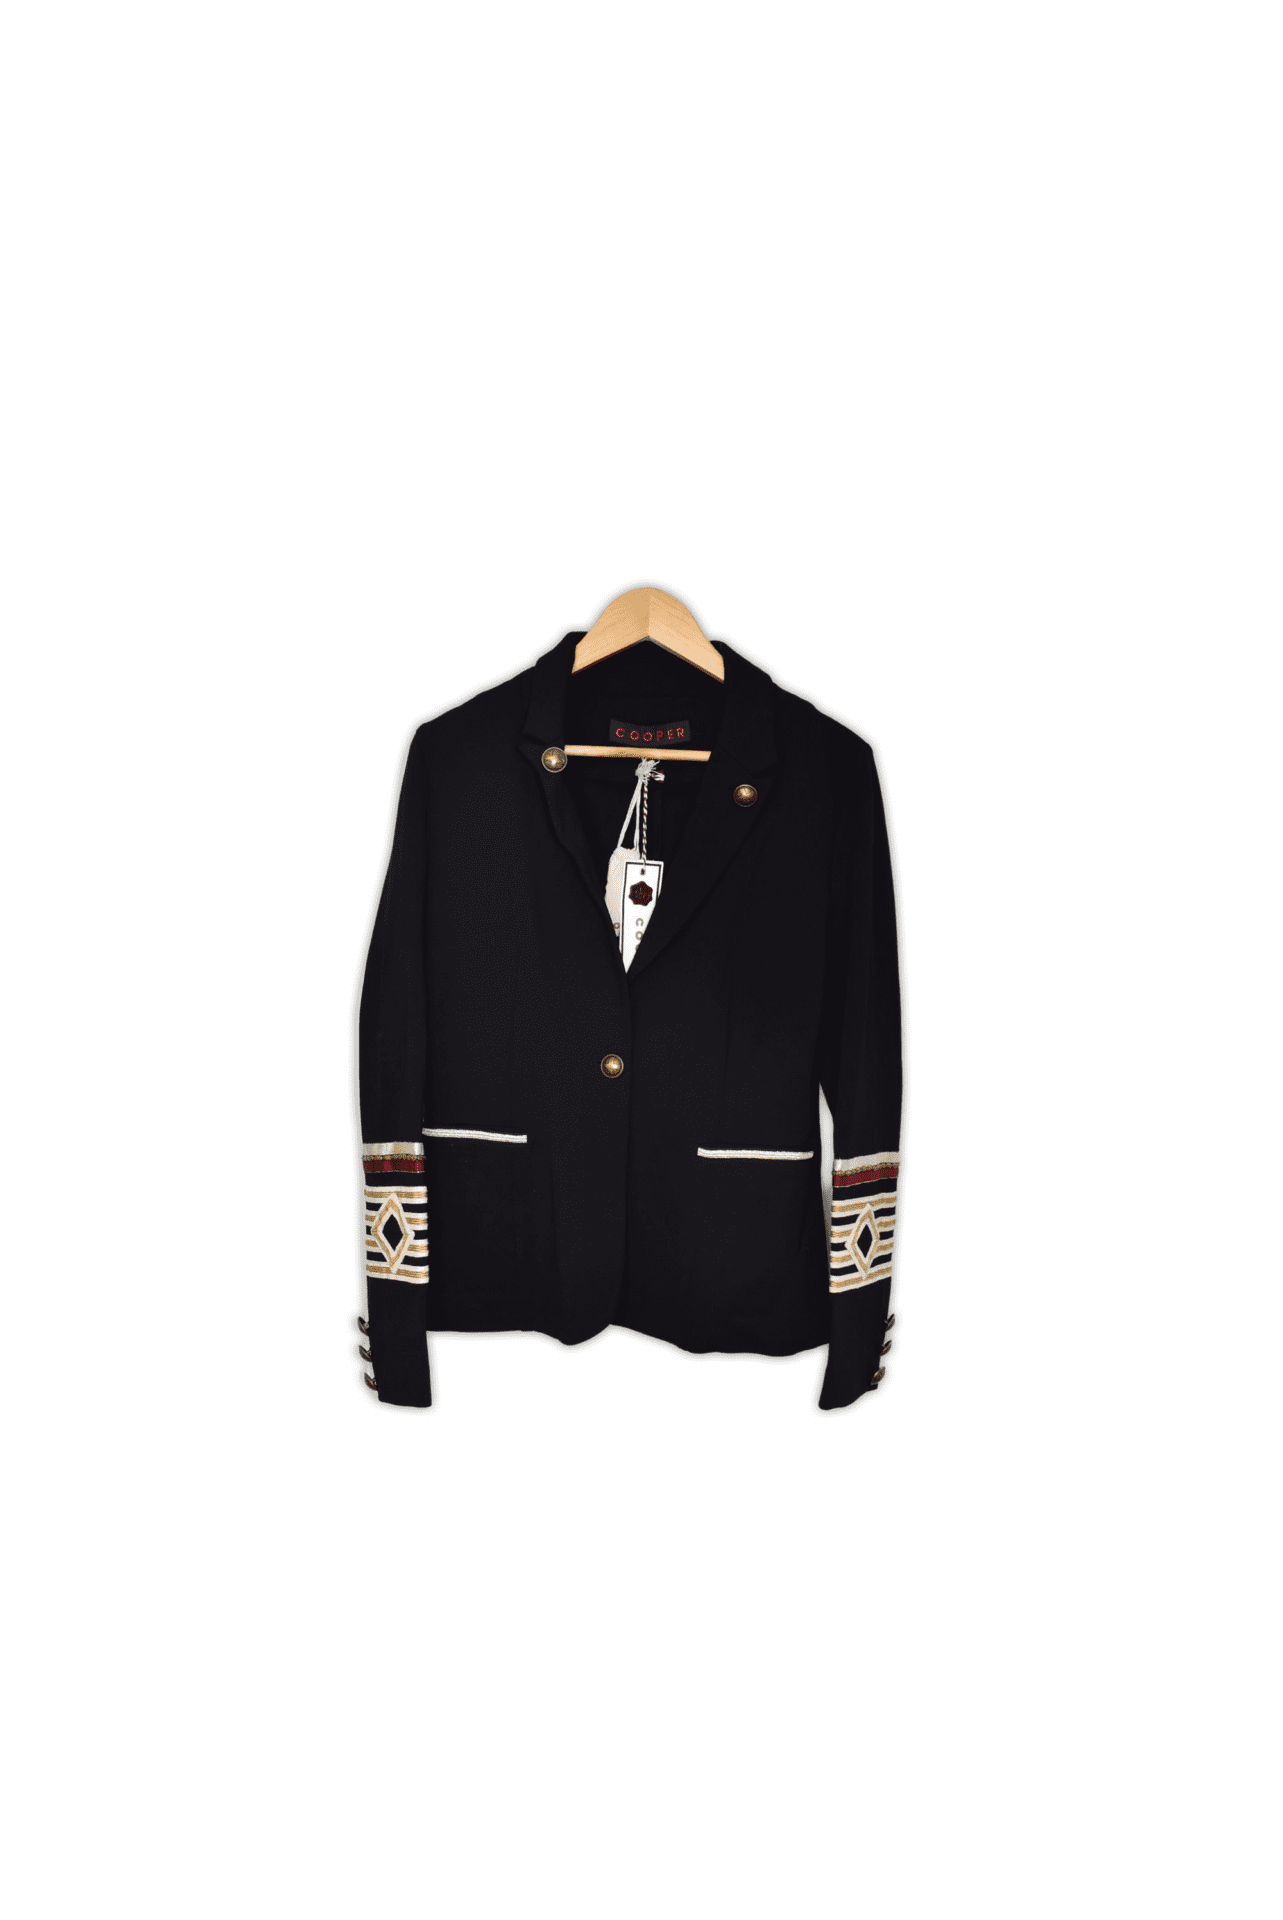 Small, cooper jacket, black and red